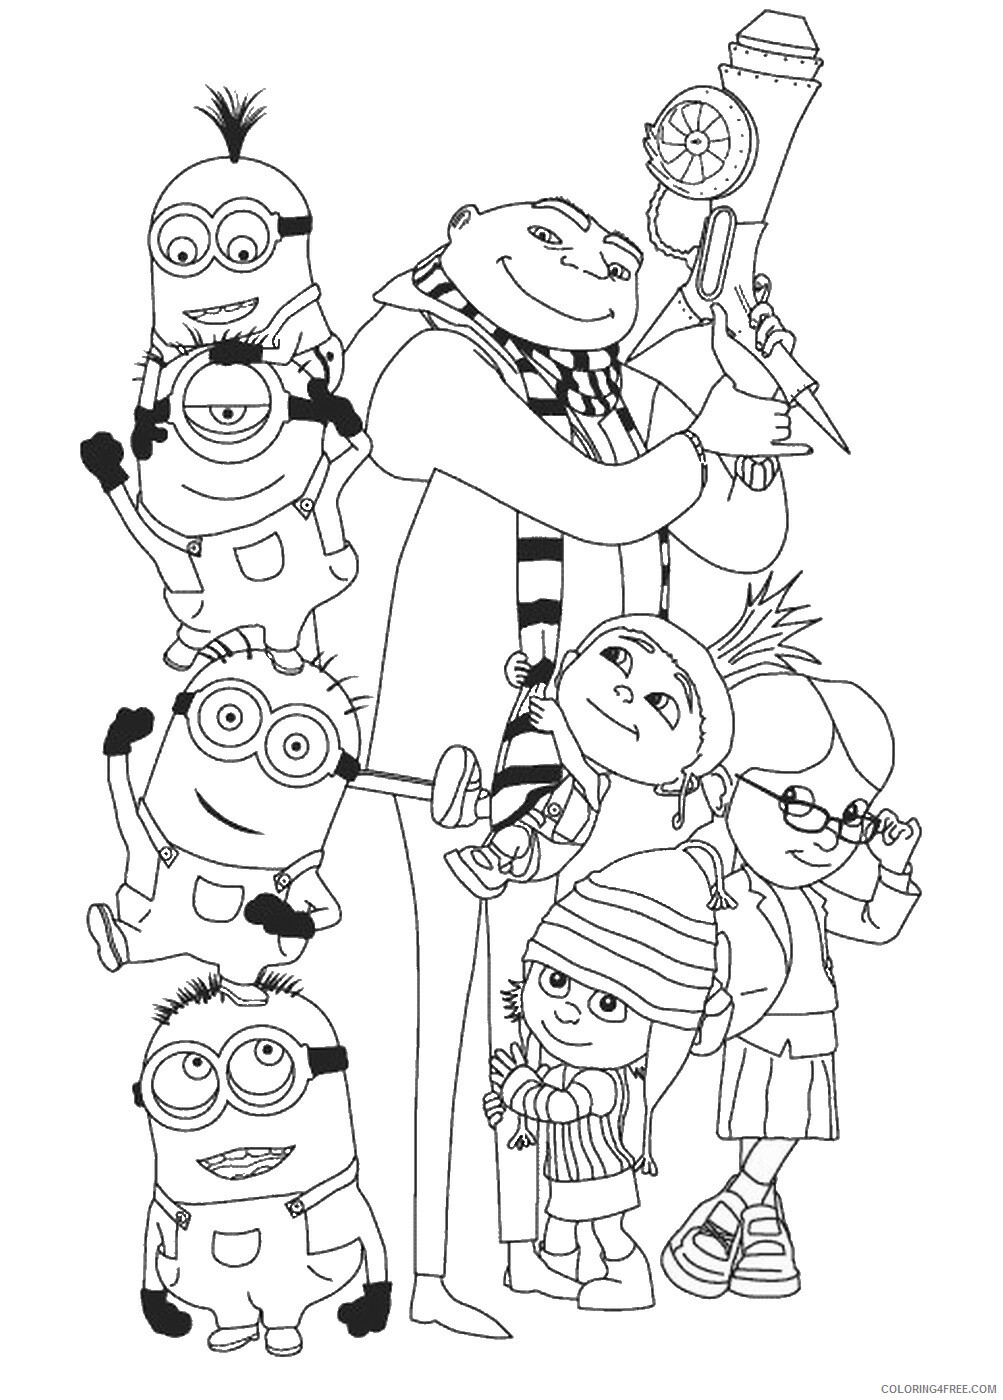 Despicable Me Coloring Pages TV Film despicable_me_cl_11 Printable 2020 02476 Coloring4free